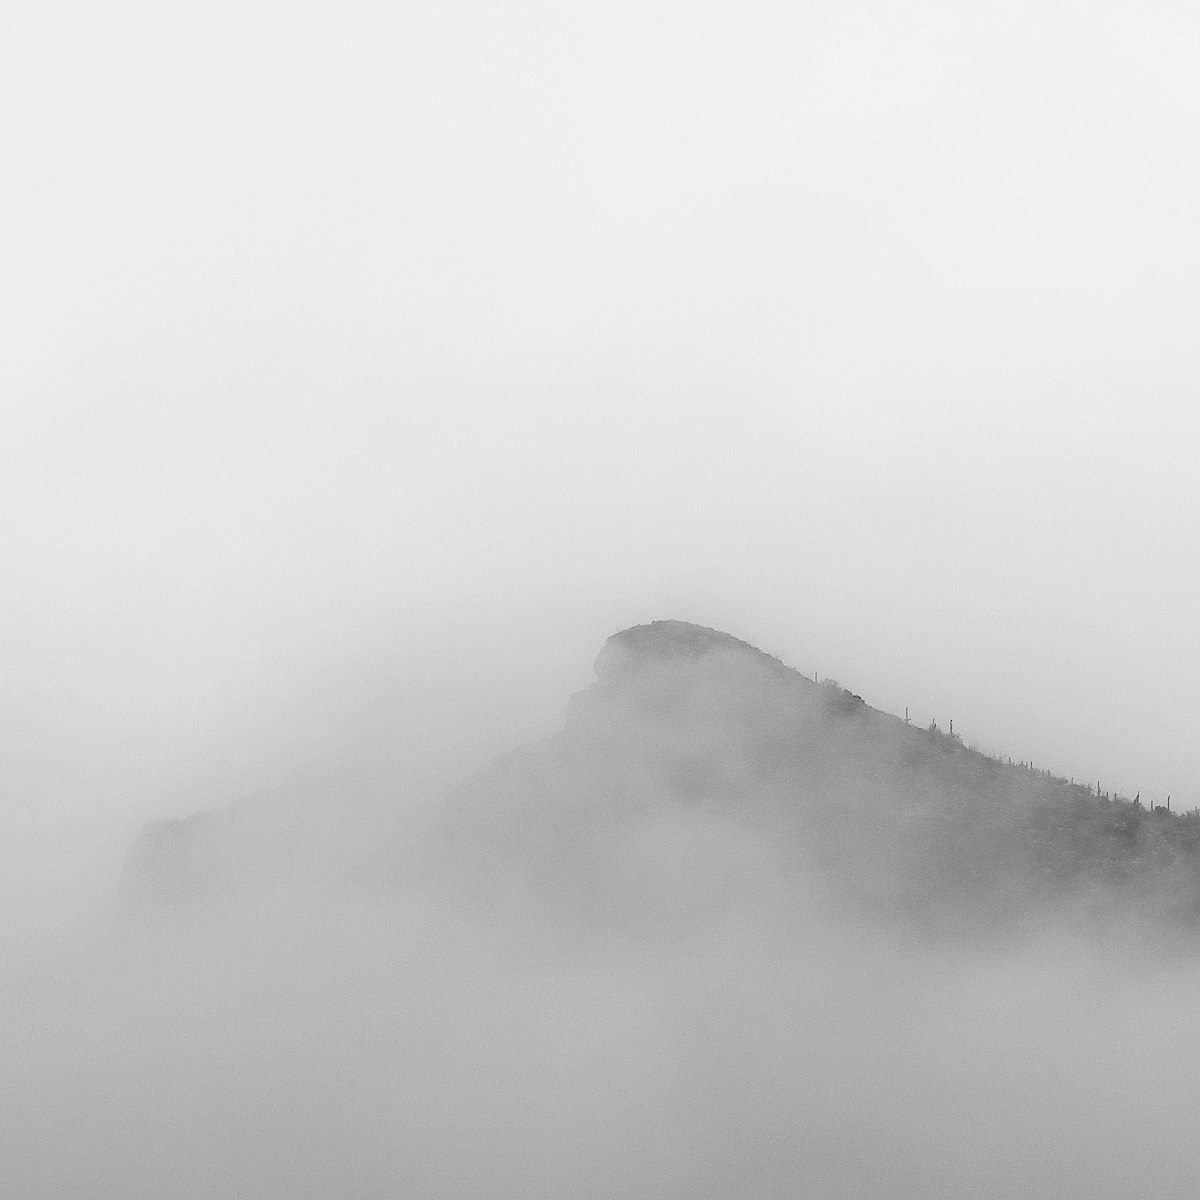 Weathertop in low clouds, from the General Hitchcock Highway. February 2018.